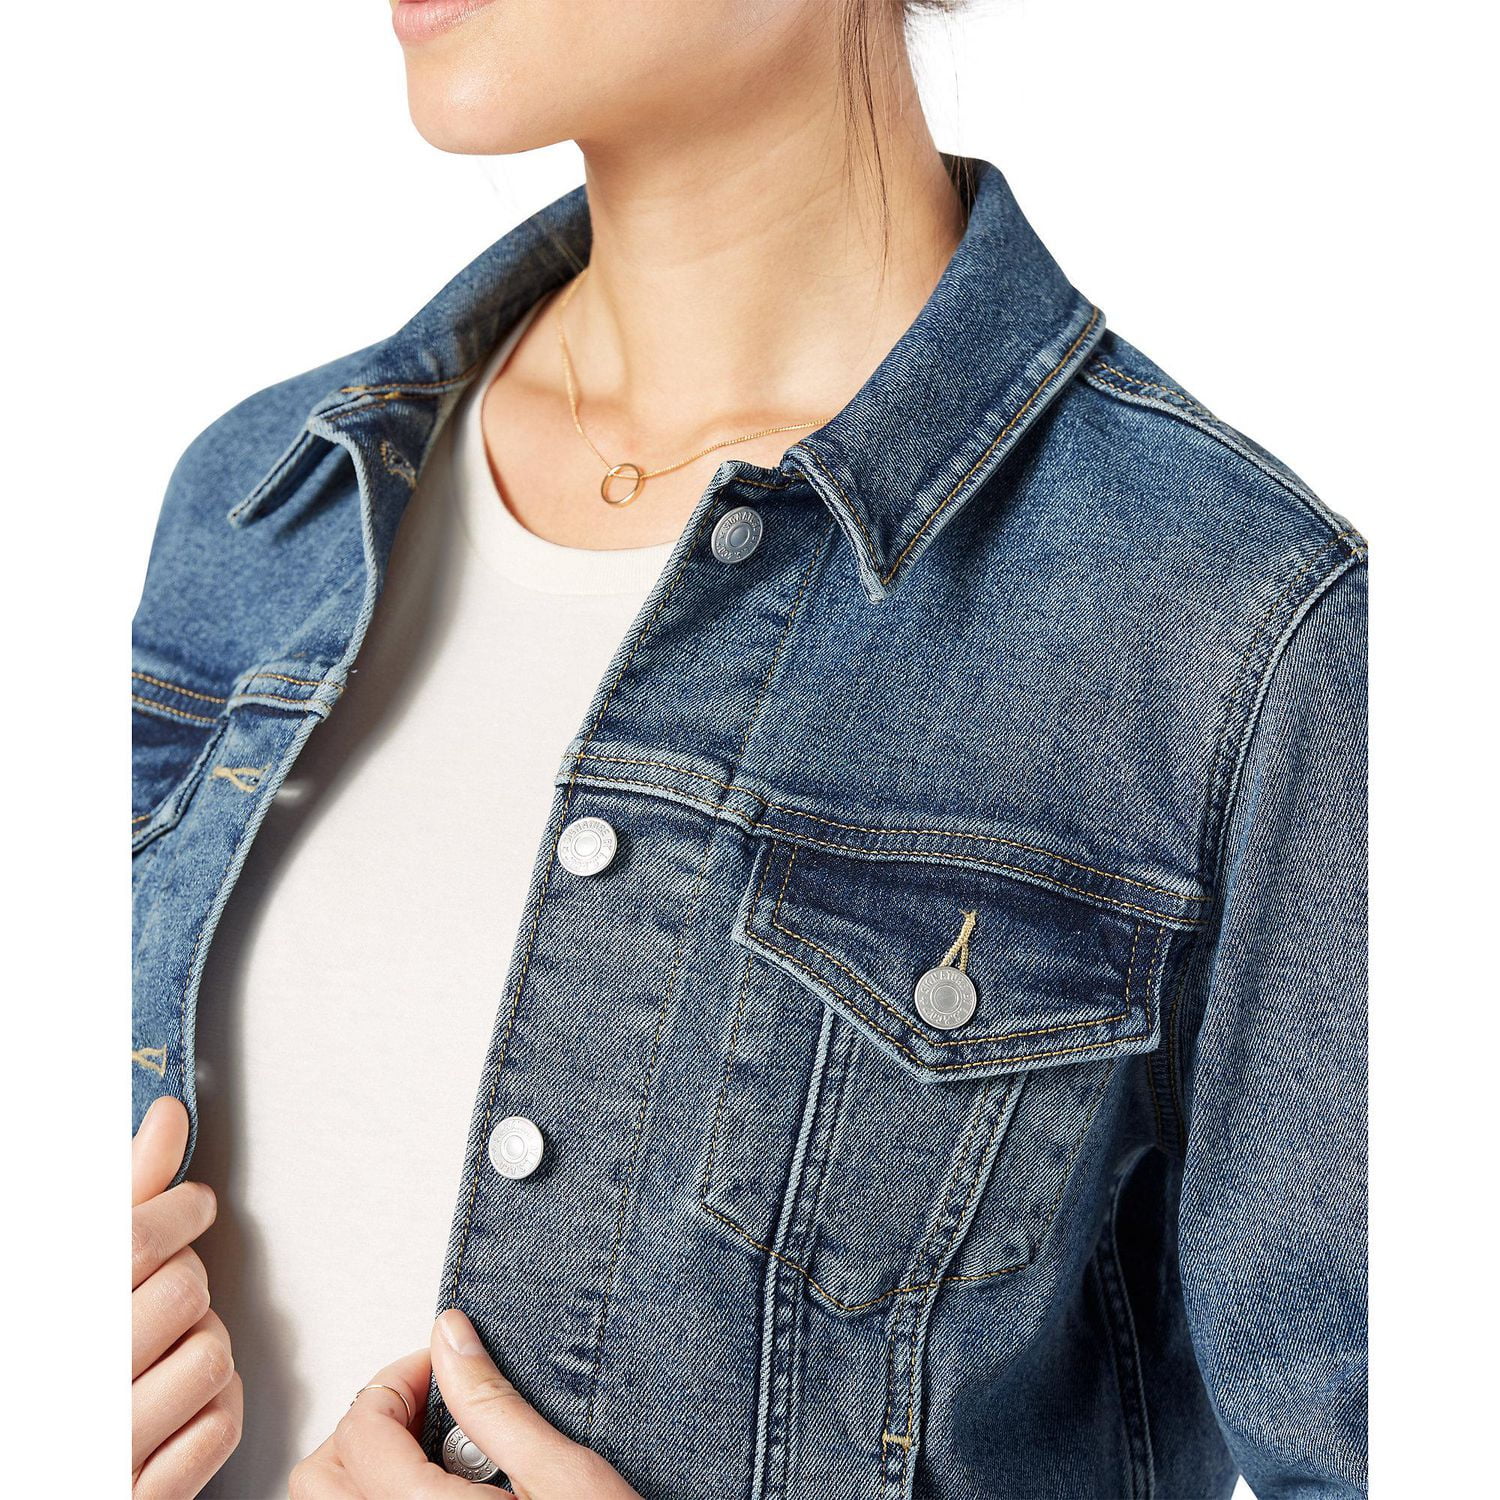 Signature by Levi Strauss & Co.®. Women's Trucker Jacket, Available sizes:  XS – XXL 